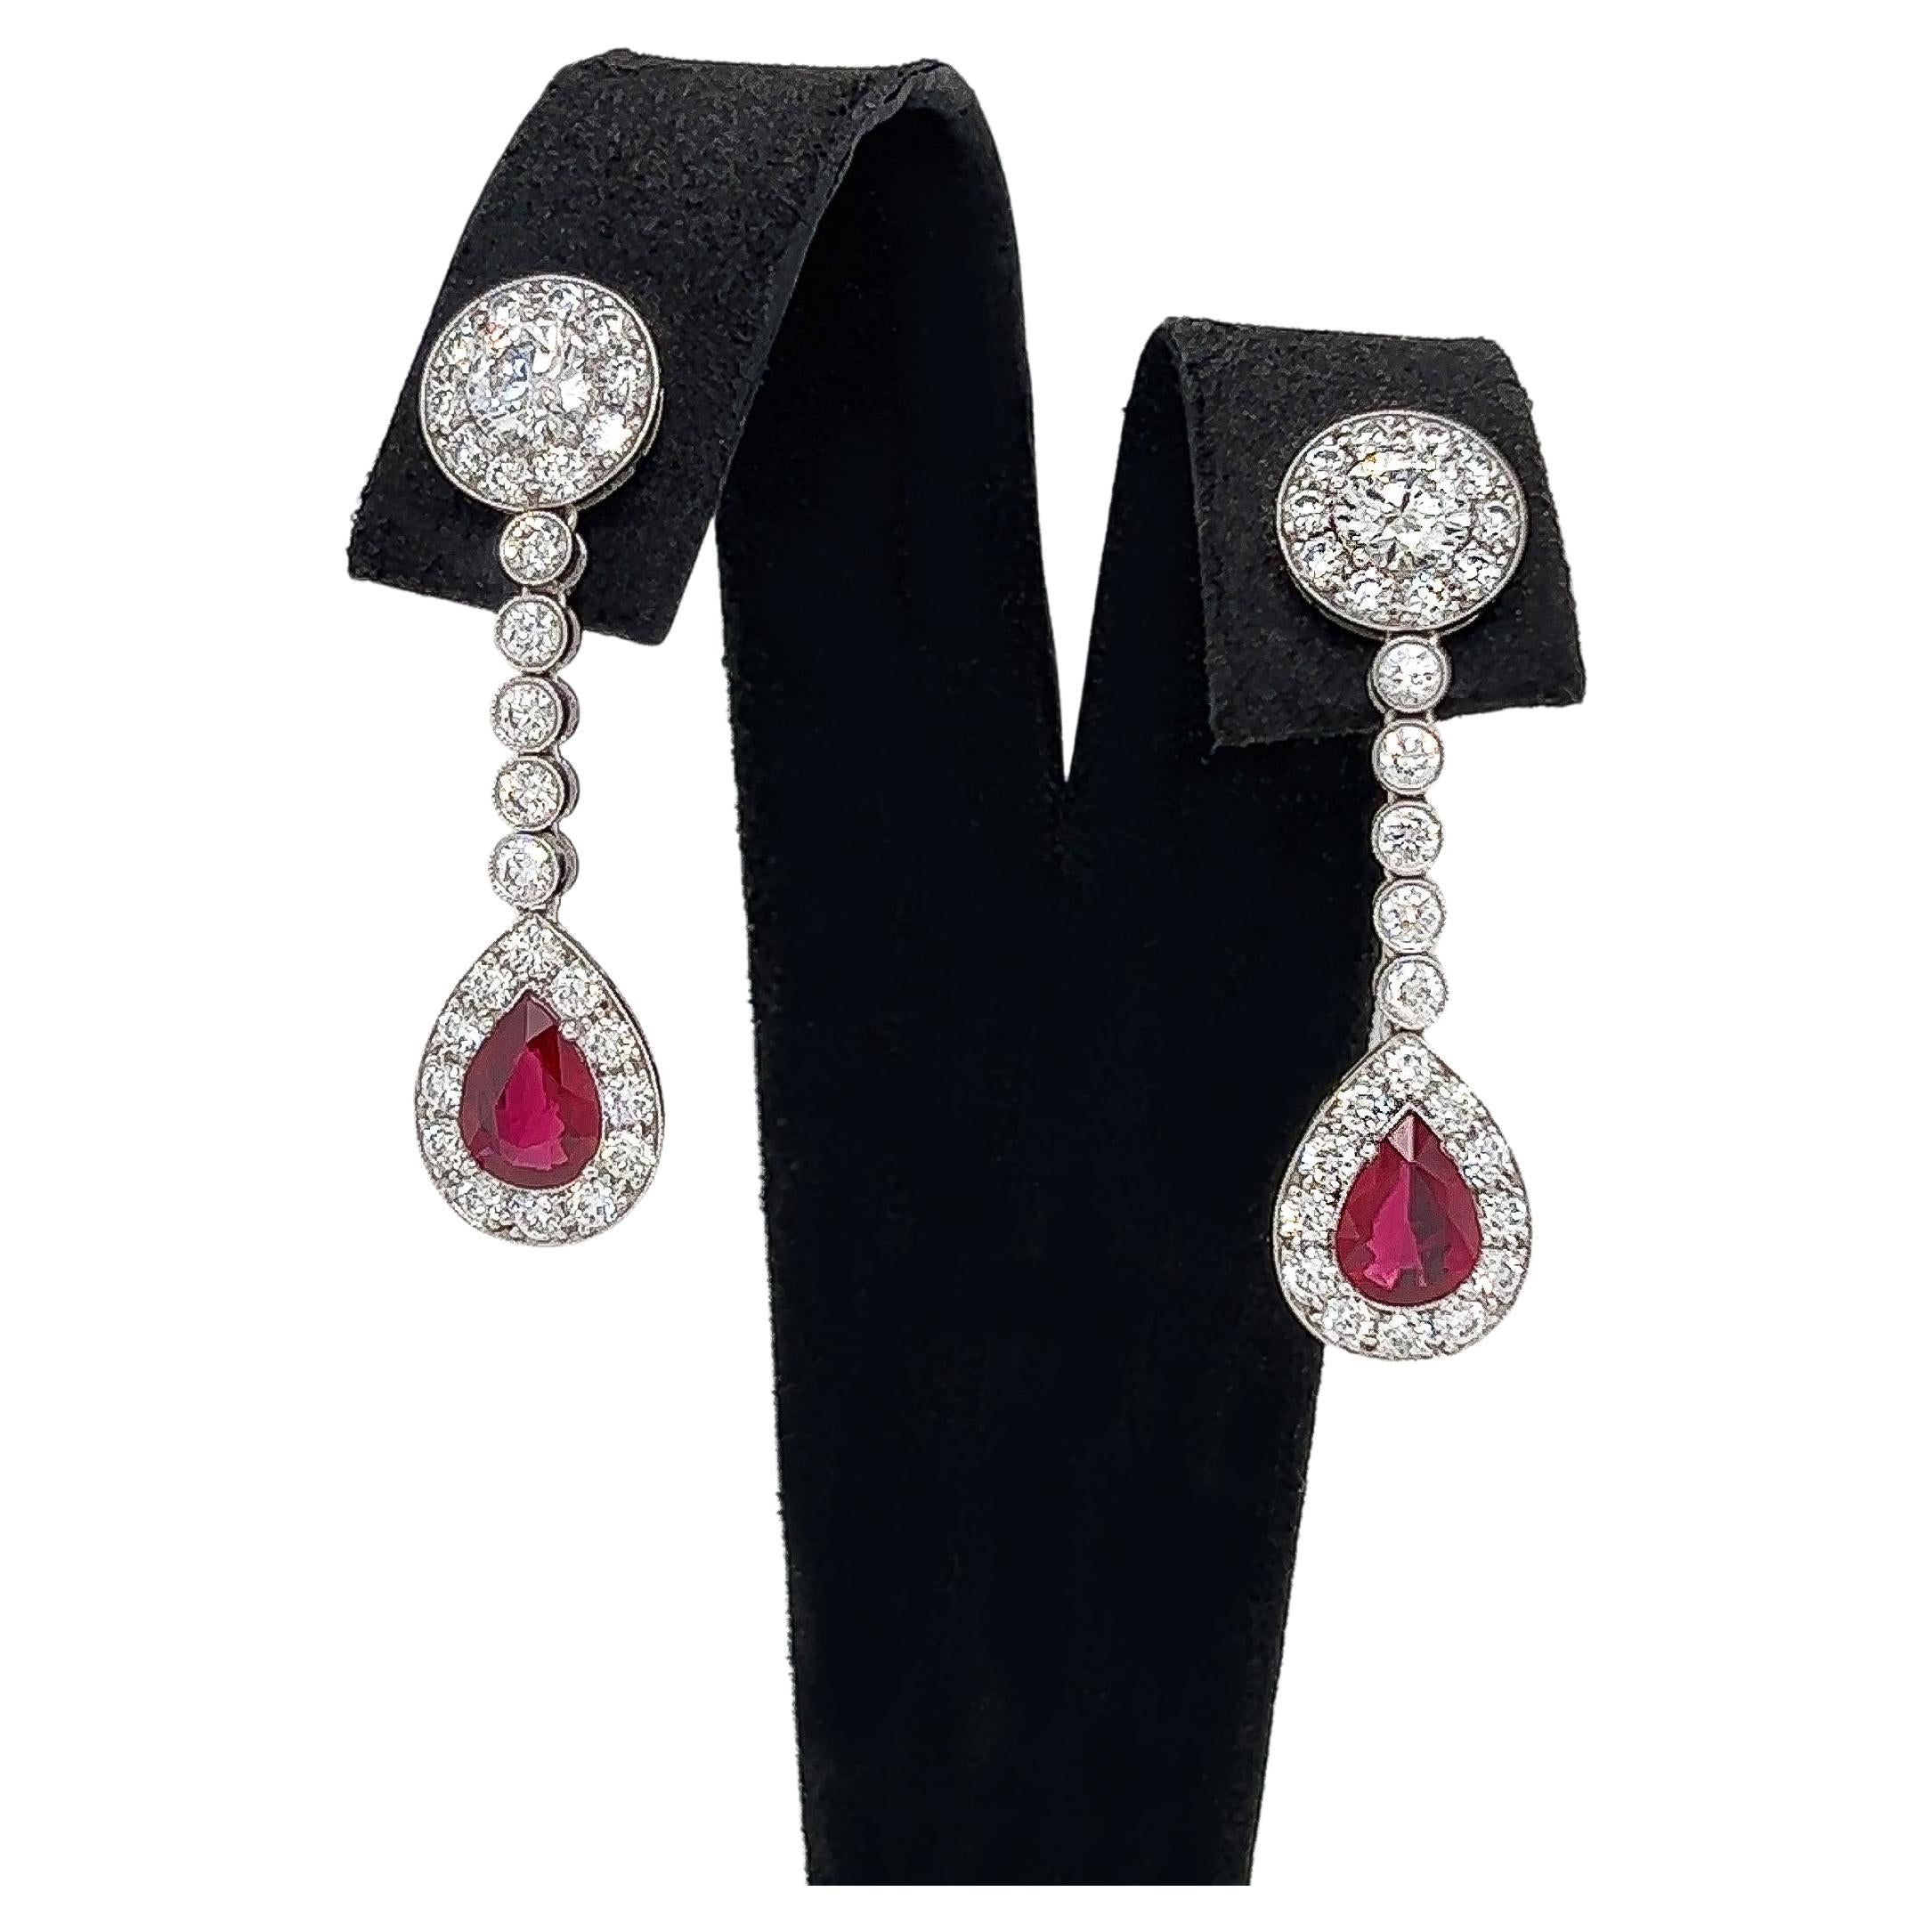 4.94 Total Carat Ruby and Diamond Drop Earrings in Platinum

This gorgeous pair of Ruby earrings are sure to draw all eyes on you. It is created with generous 1.82 Carats worth of Pear cut rubies, surrounded by a halo and drop of round cut pave set